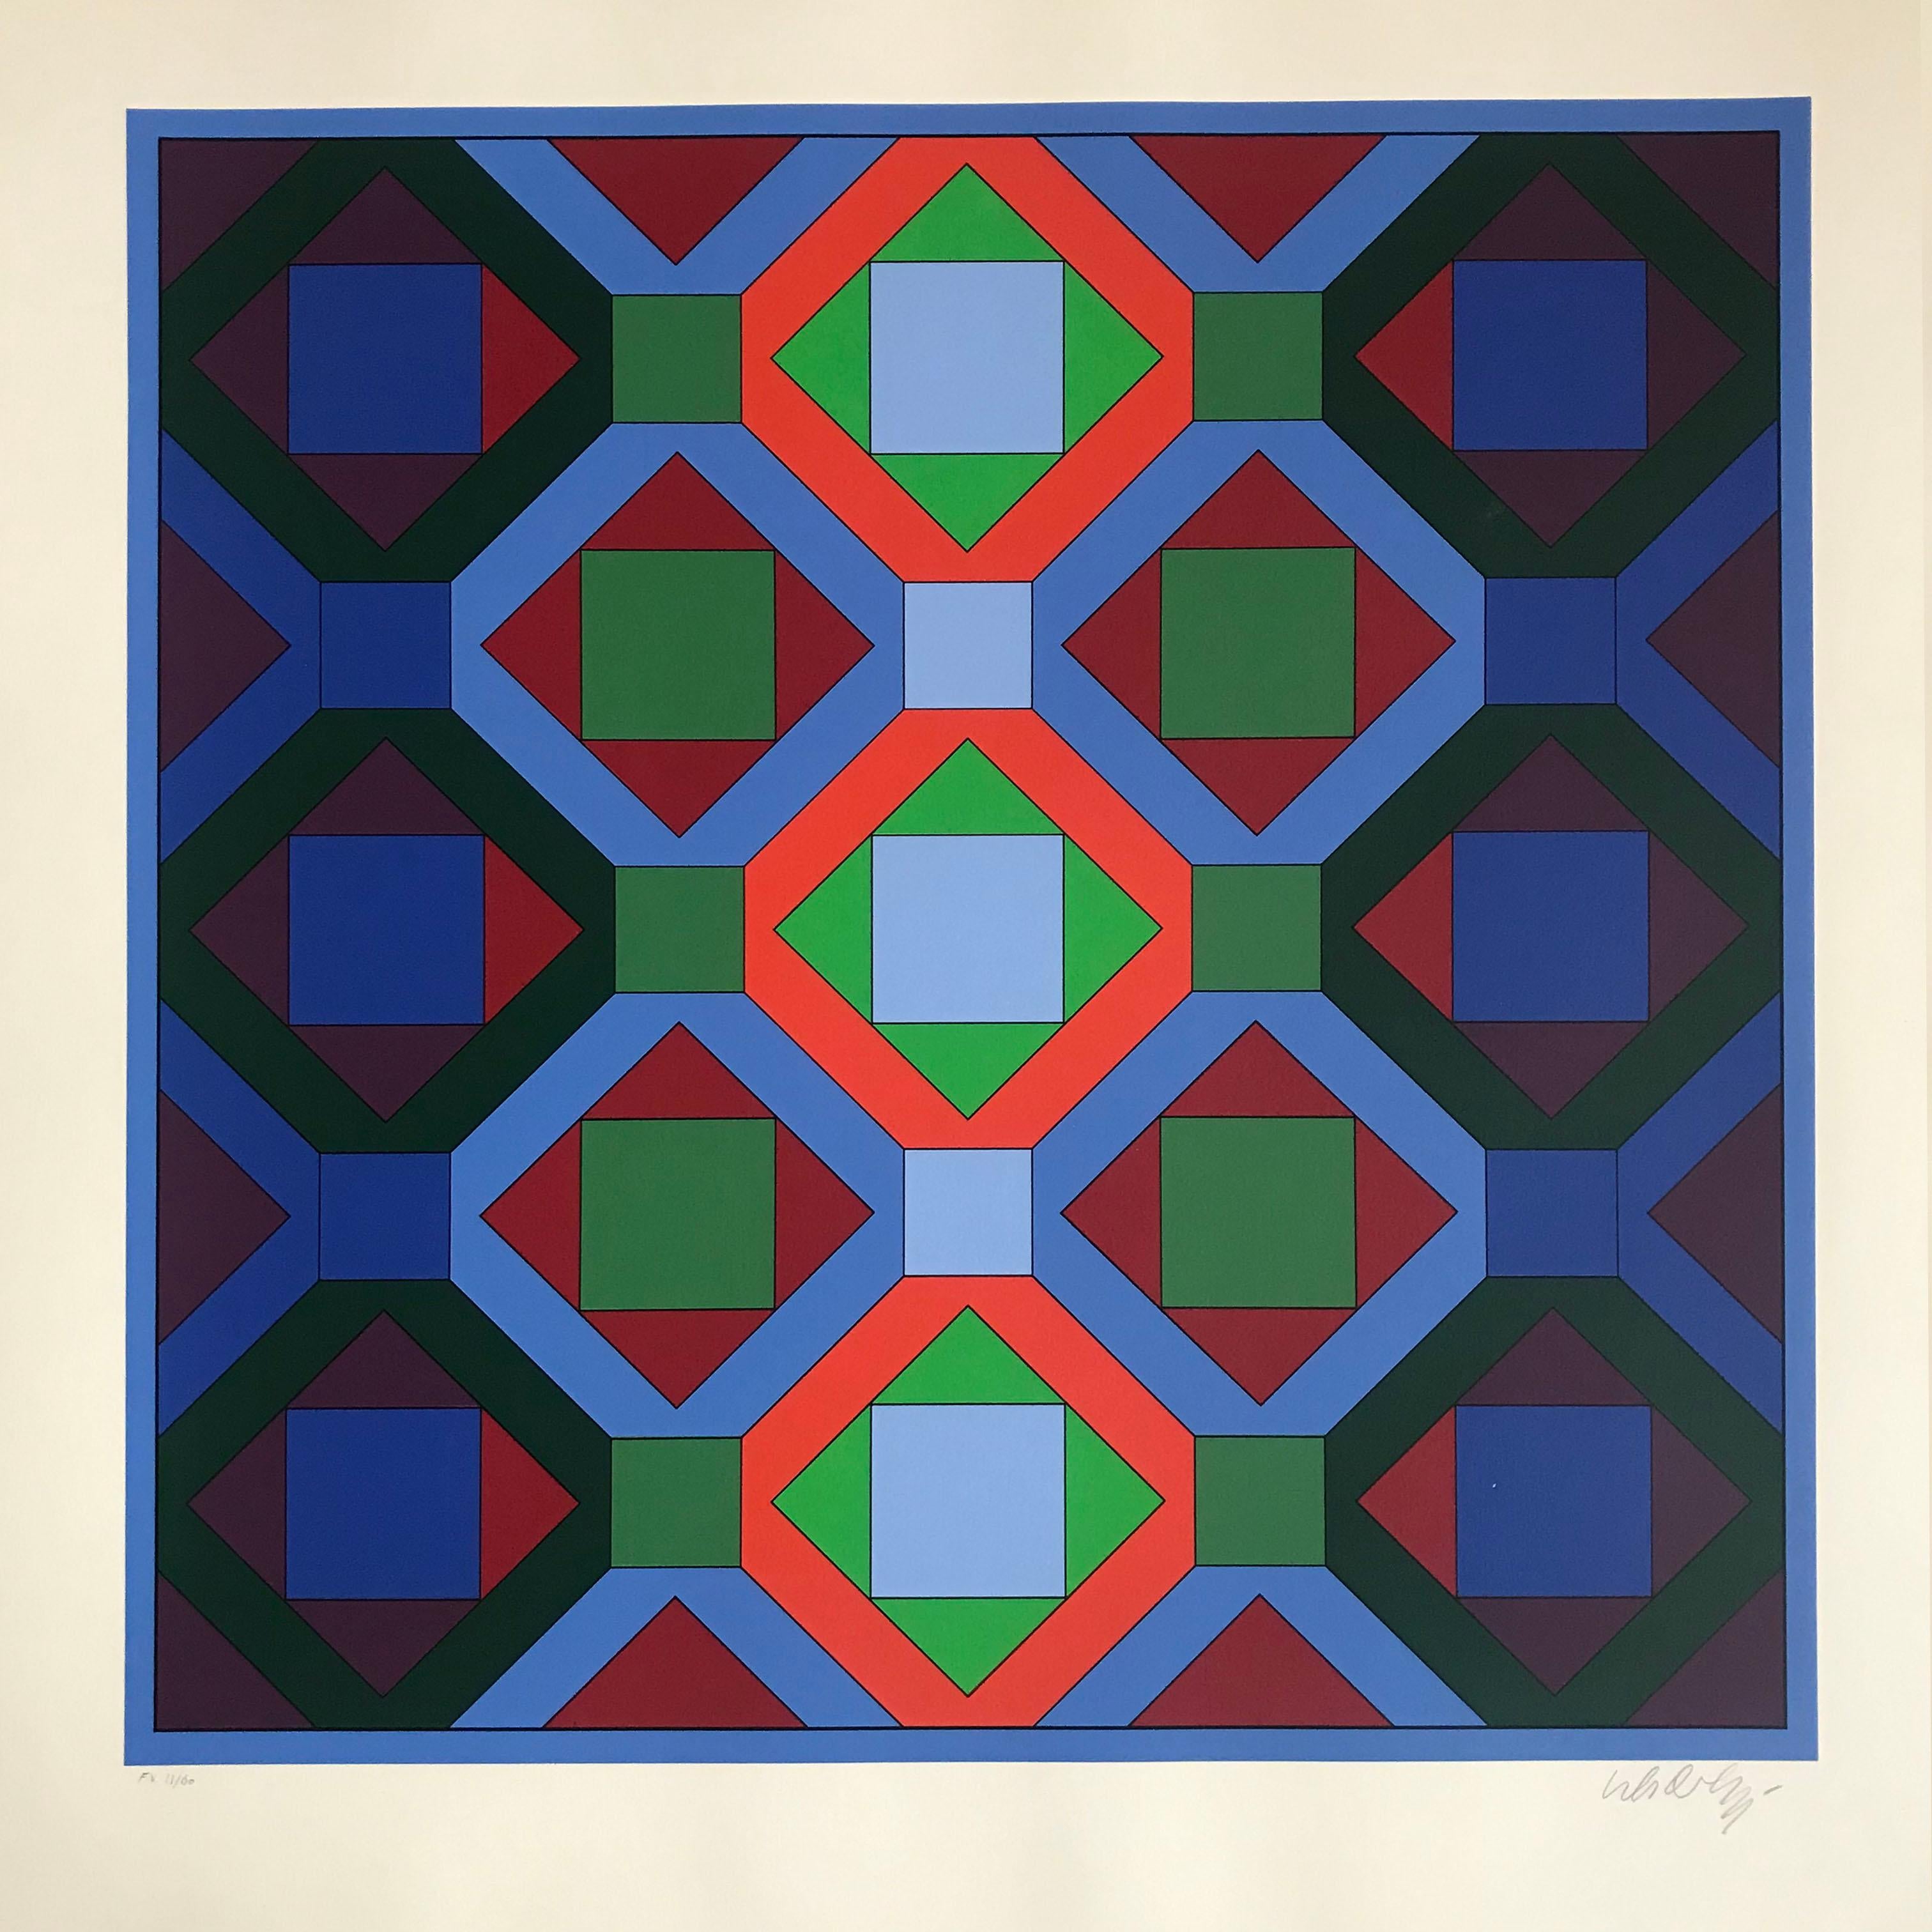 Victor Vasarely
Lithograph
Geometrical structure 4
Circa 1973
Signed by the artist in pencil
Numbered in pencil by the artist 11/60
Annotated FV in pencil